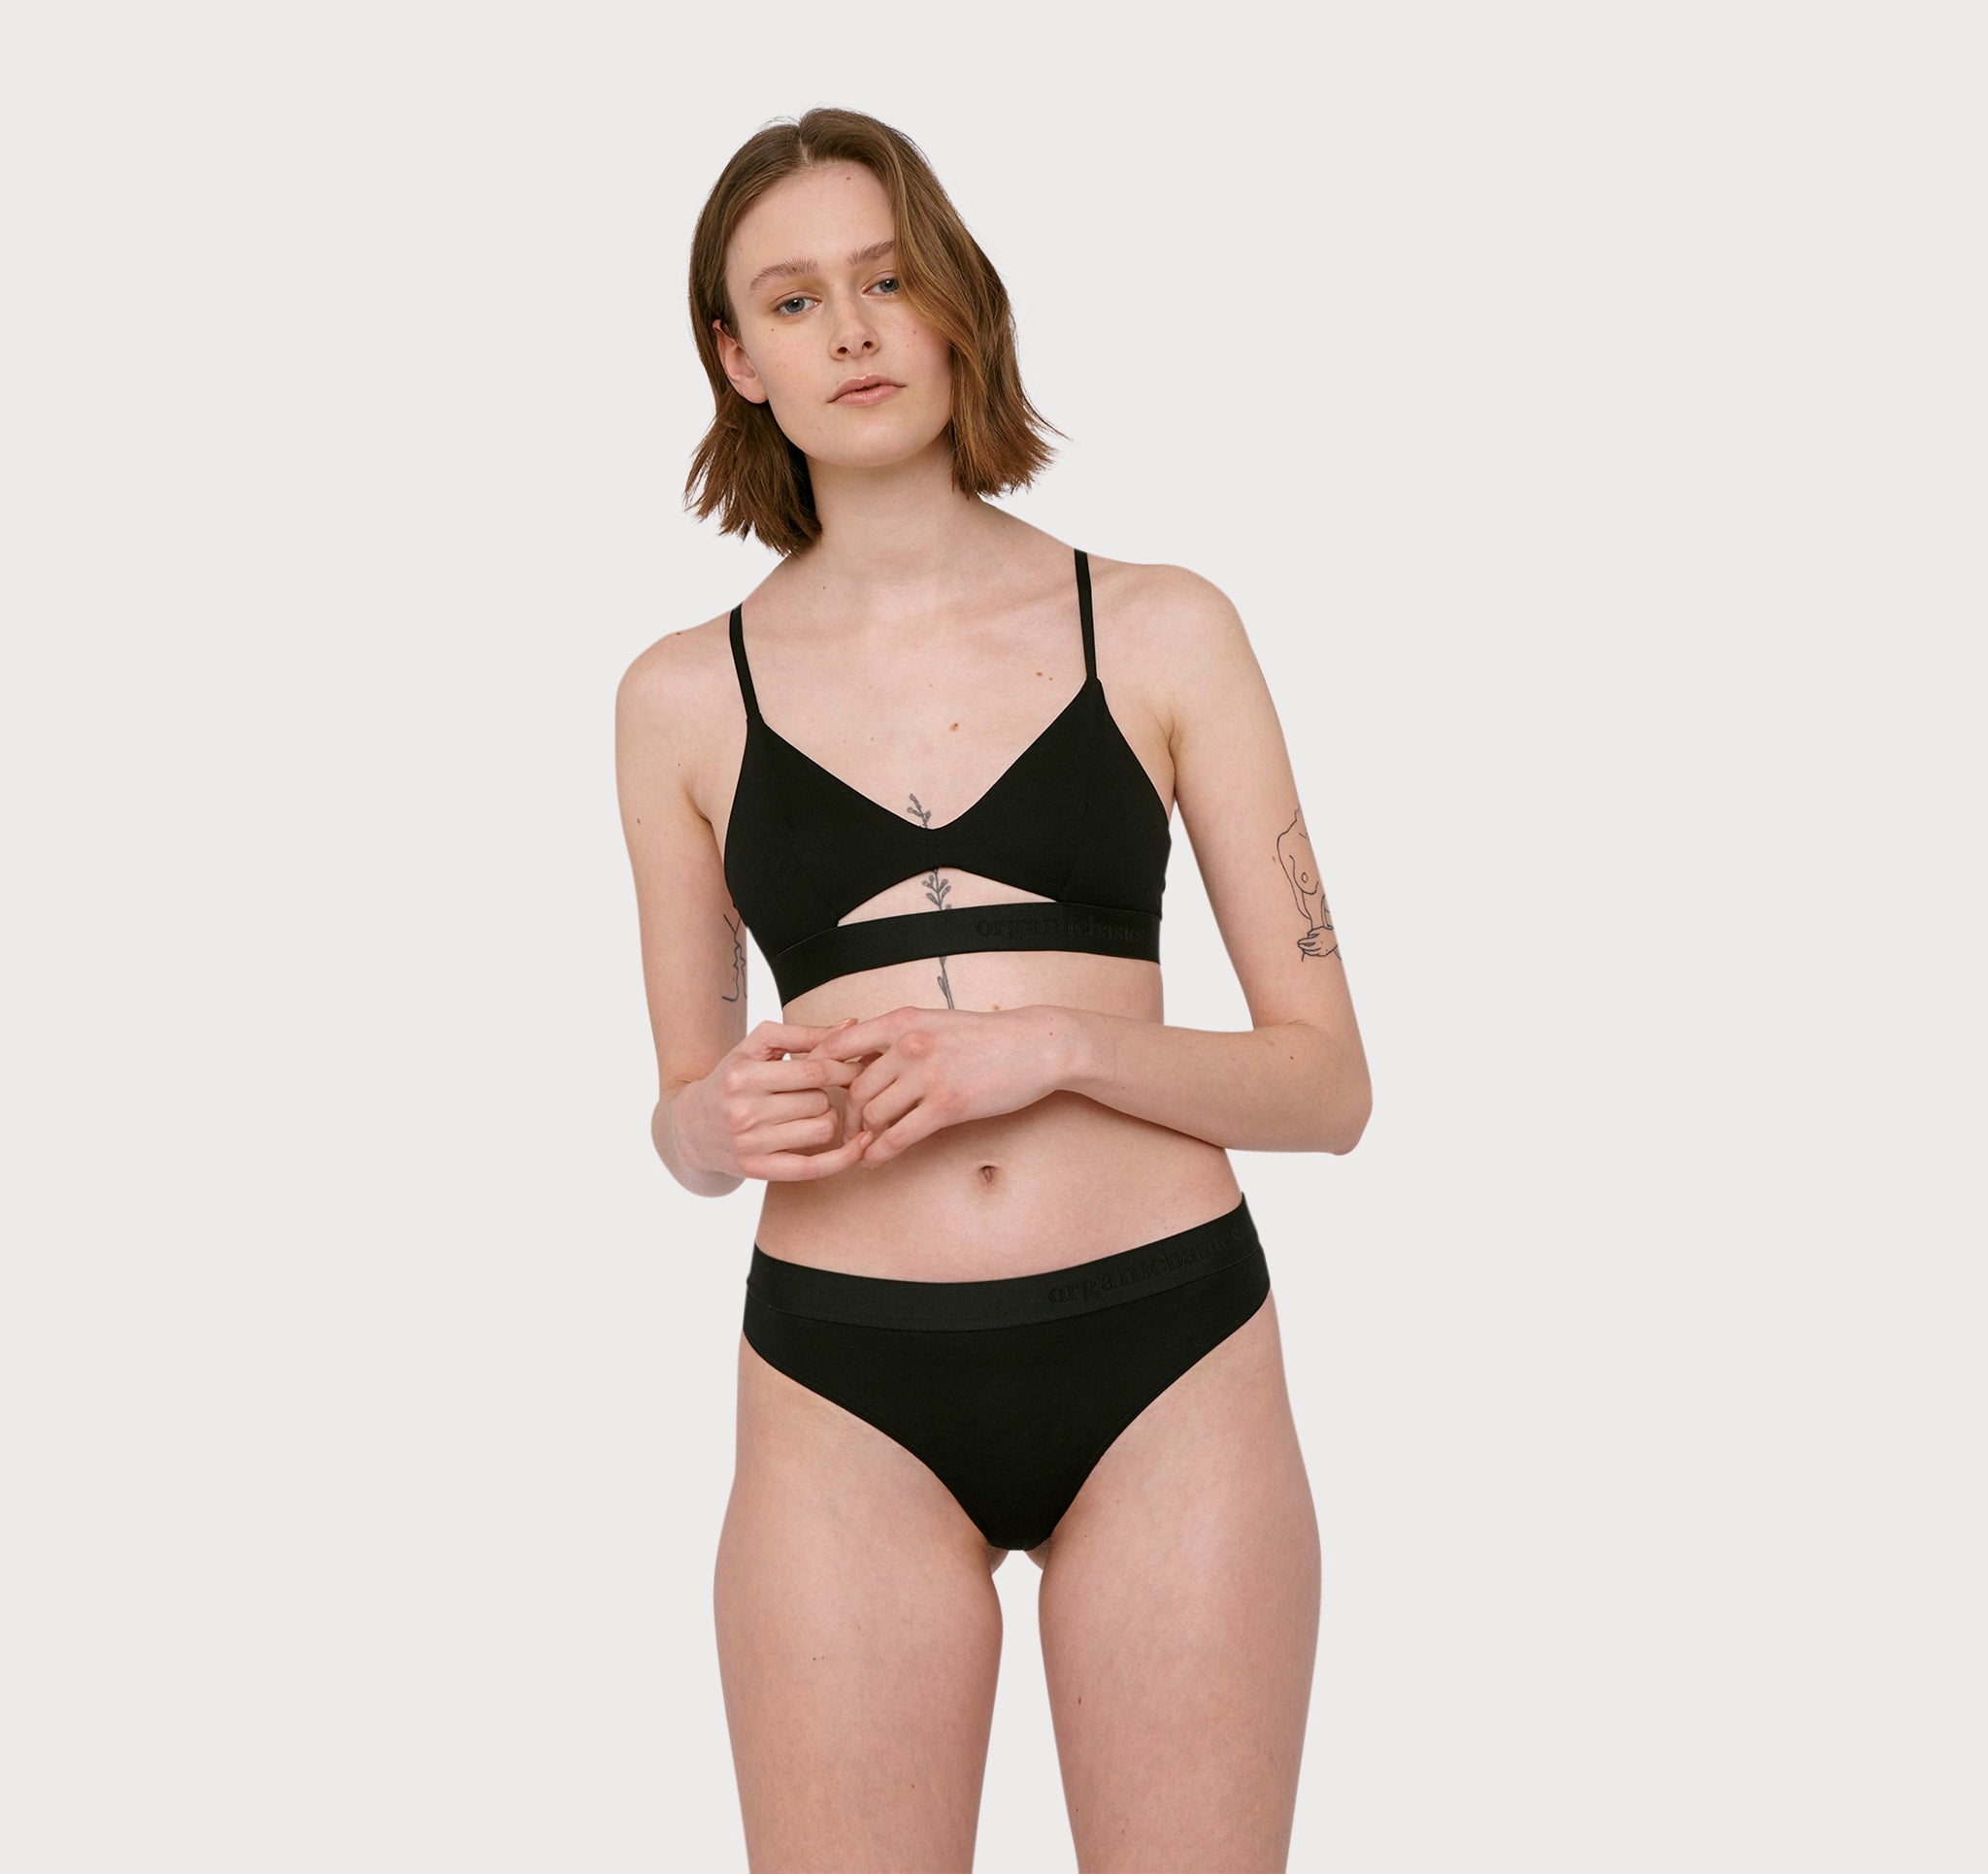 Women's Underwear  Sustainable Clothing at